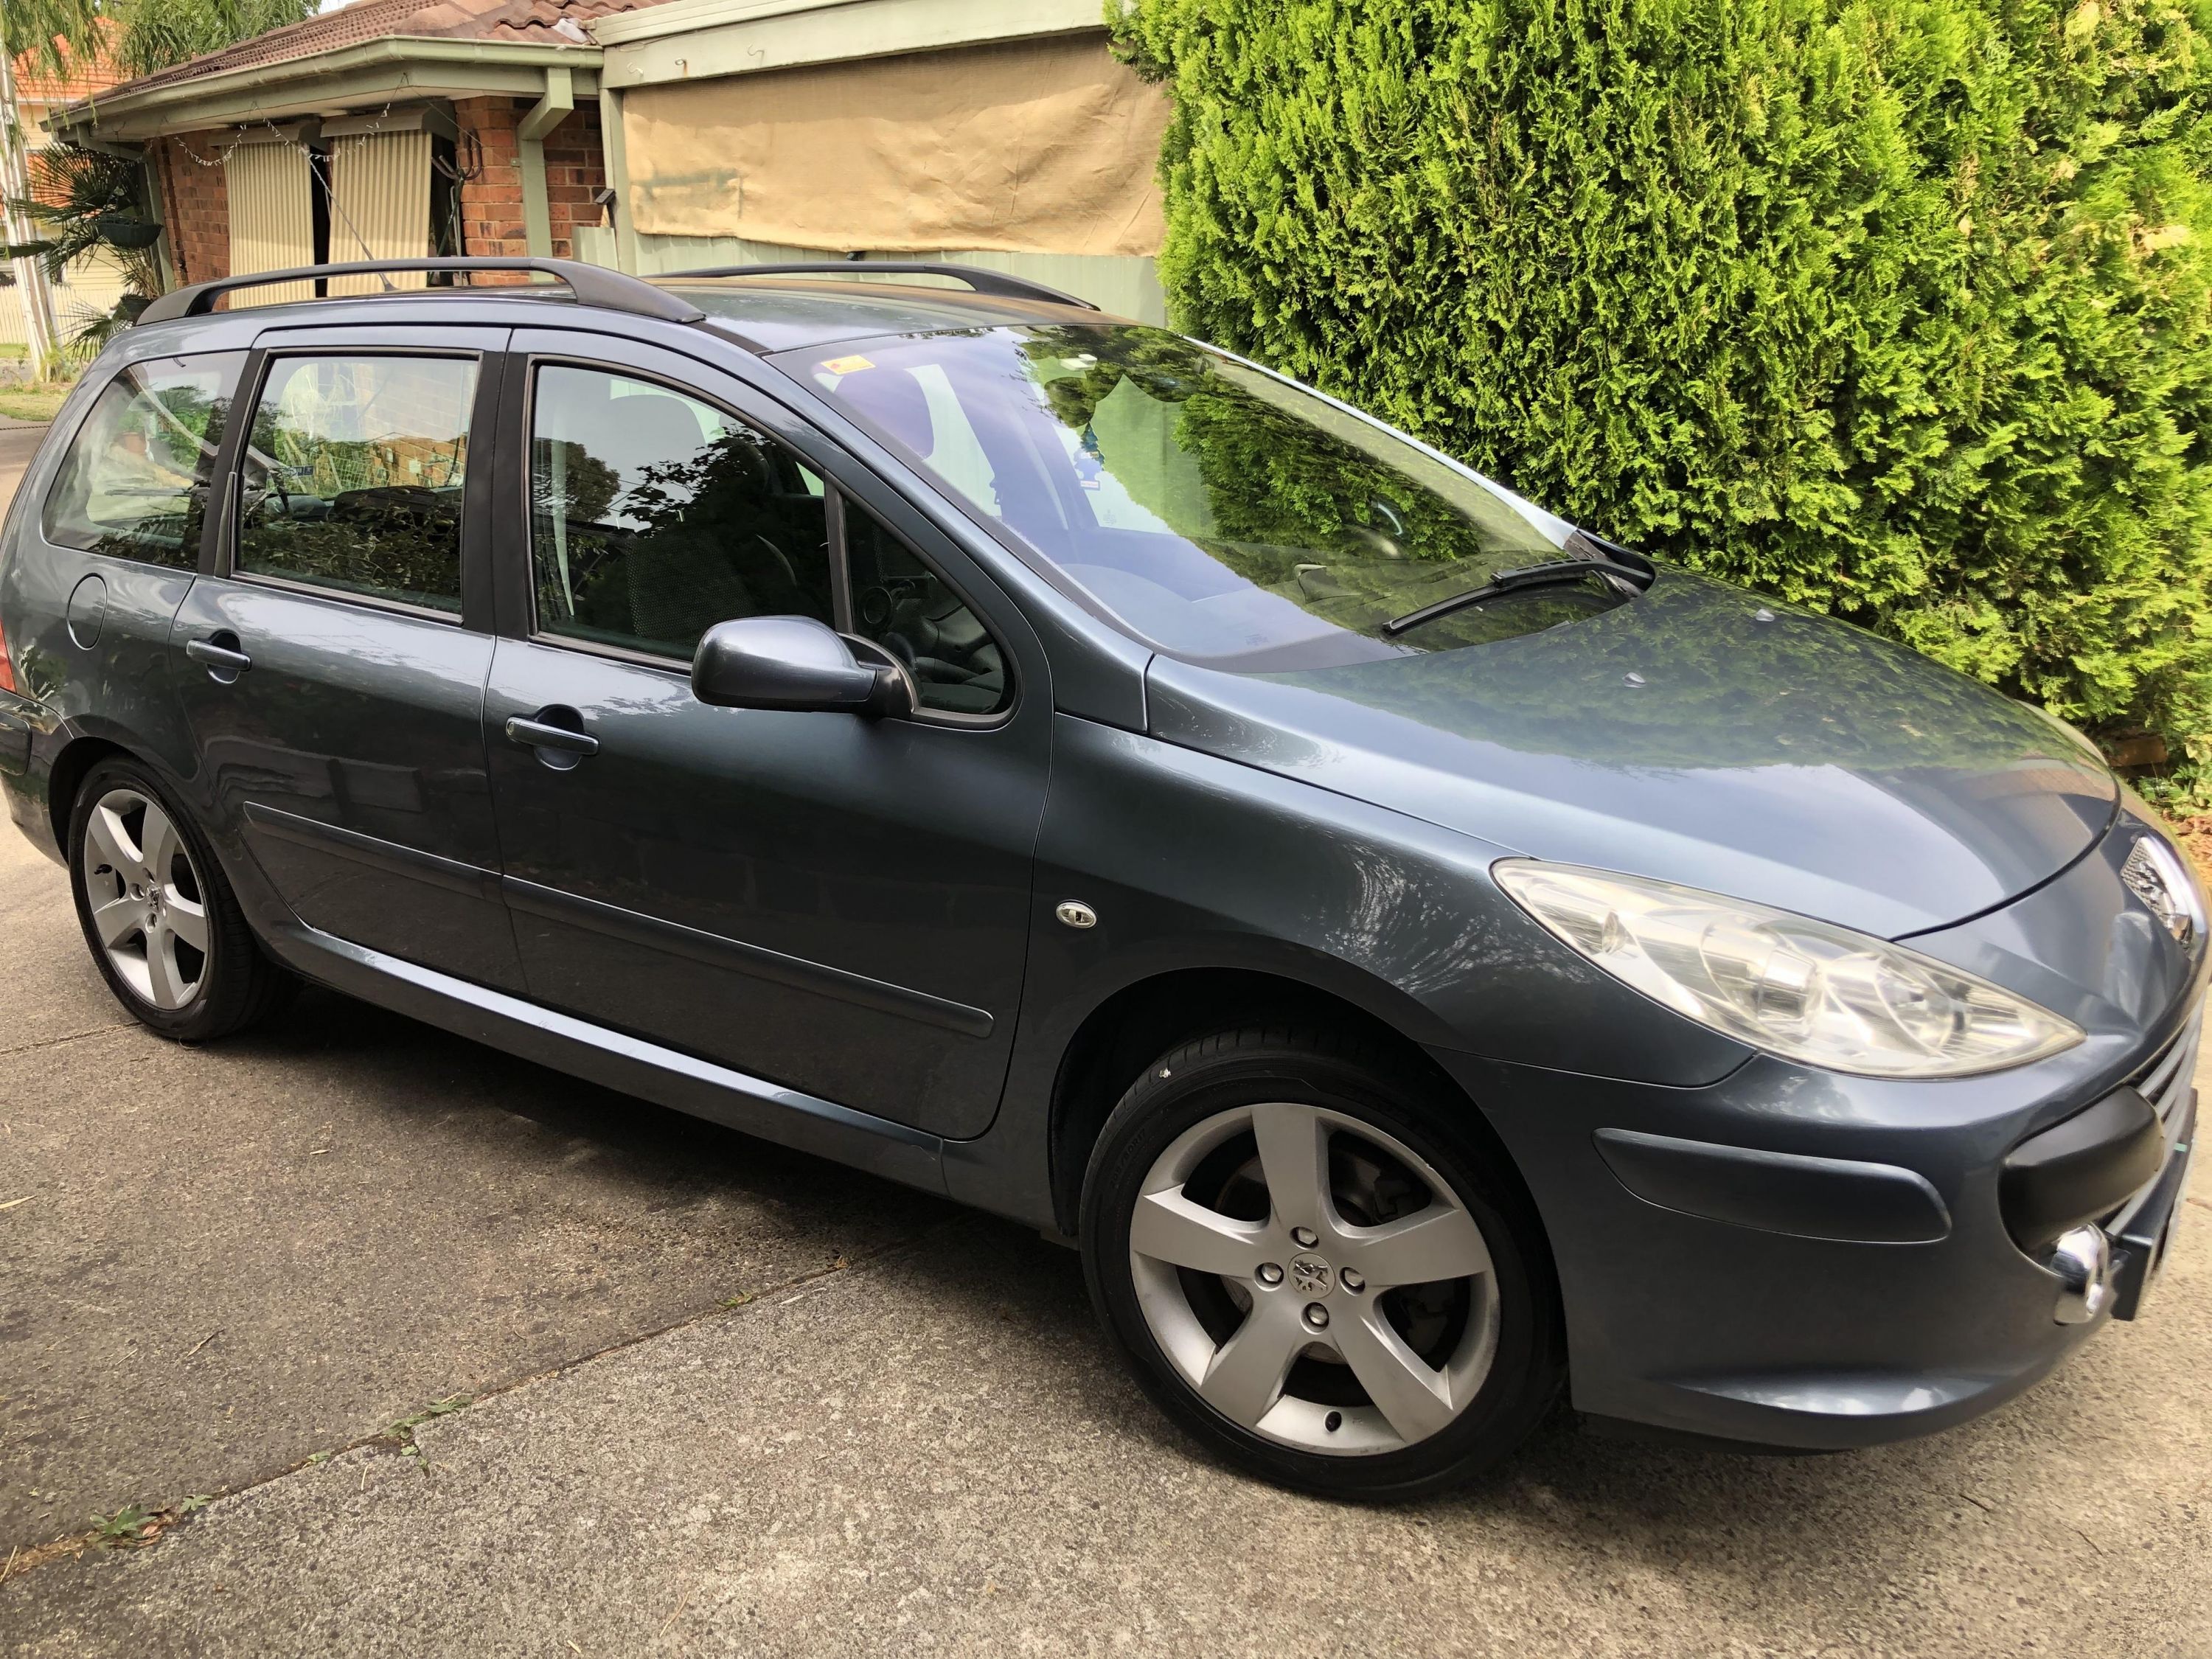 Used Peugeot 307 review: 2001-2008